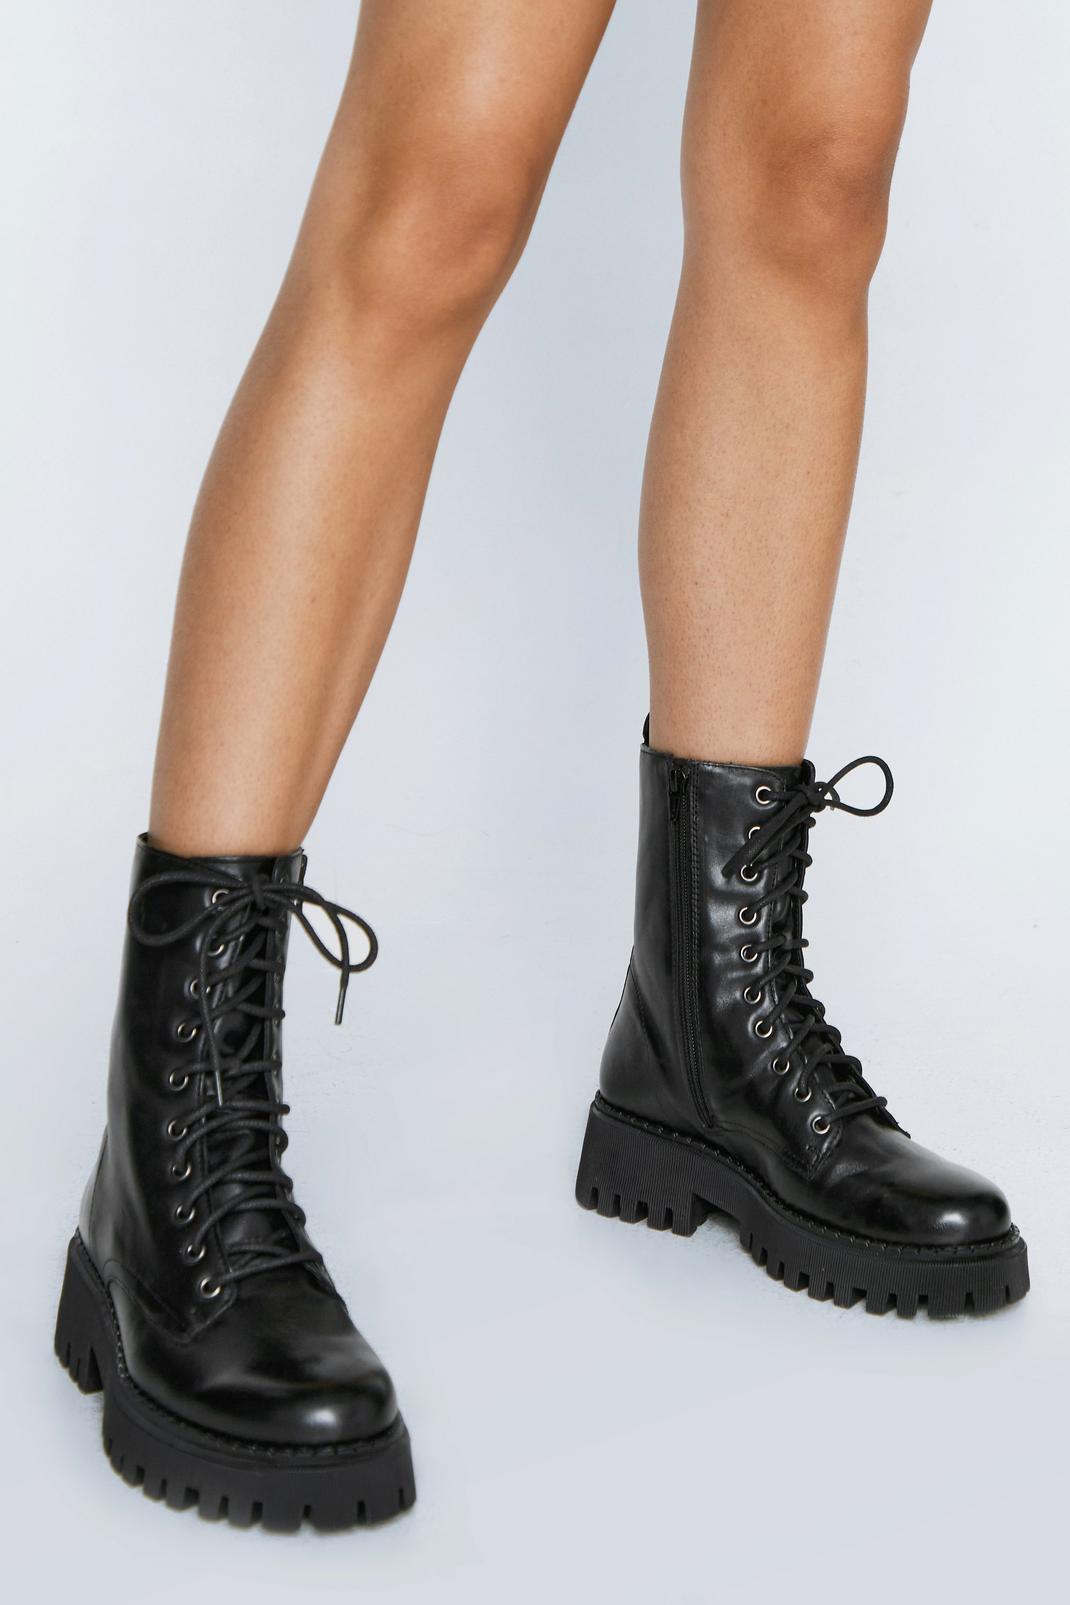 Real Leather Lace Up Biker Boots